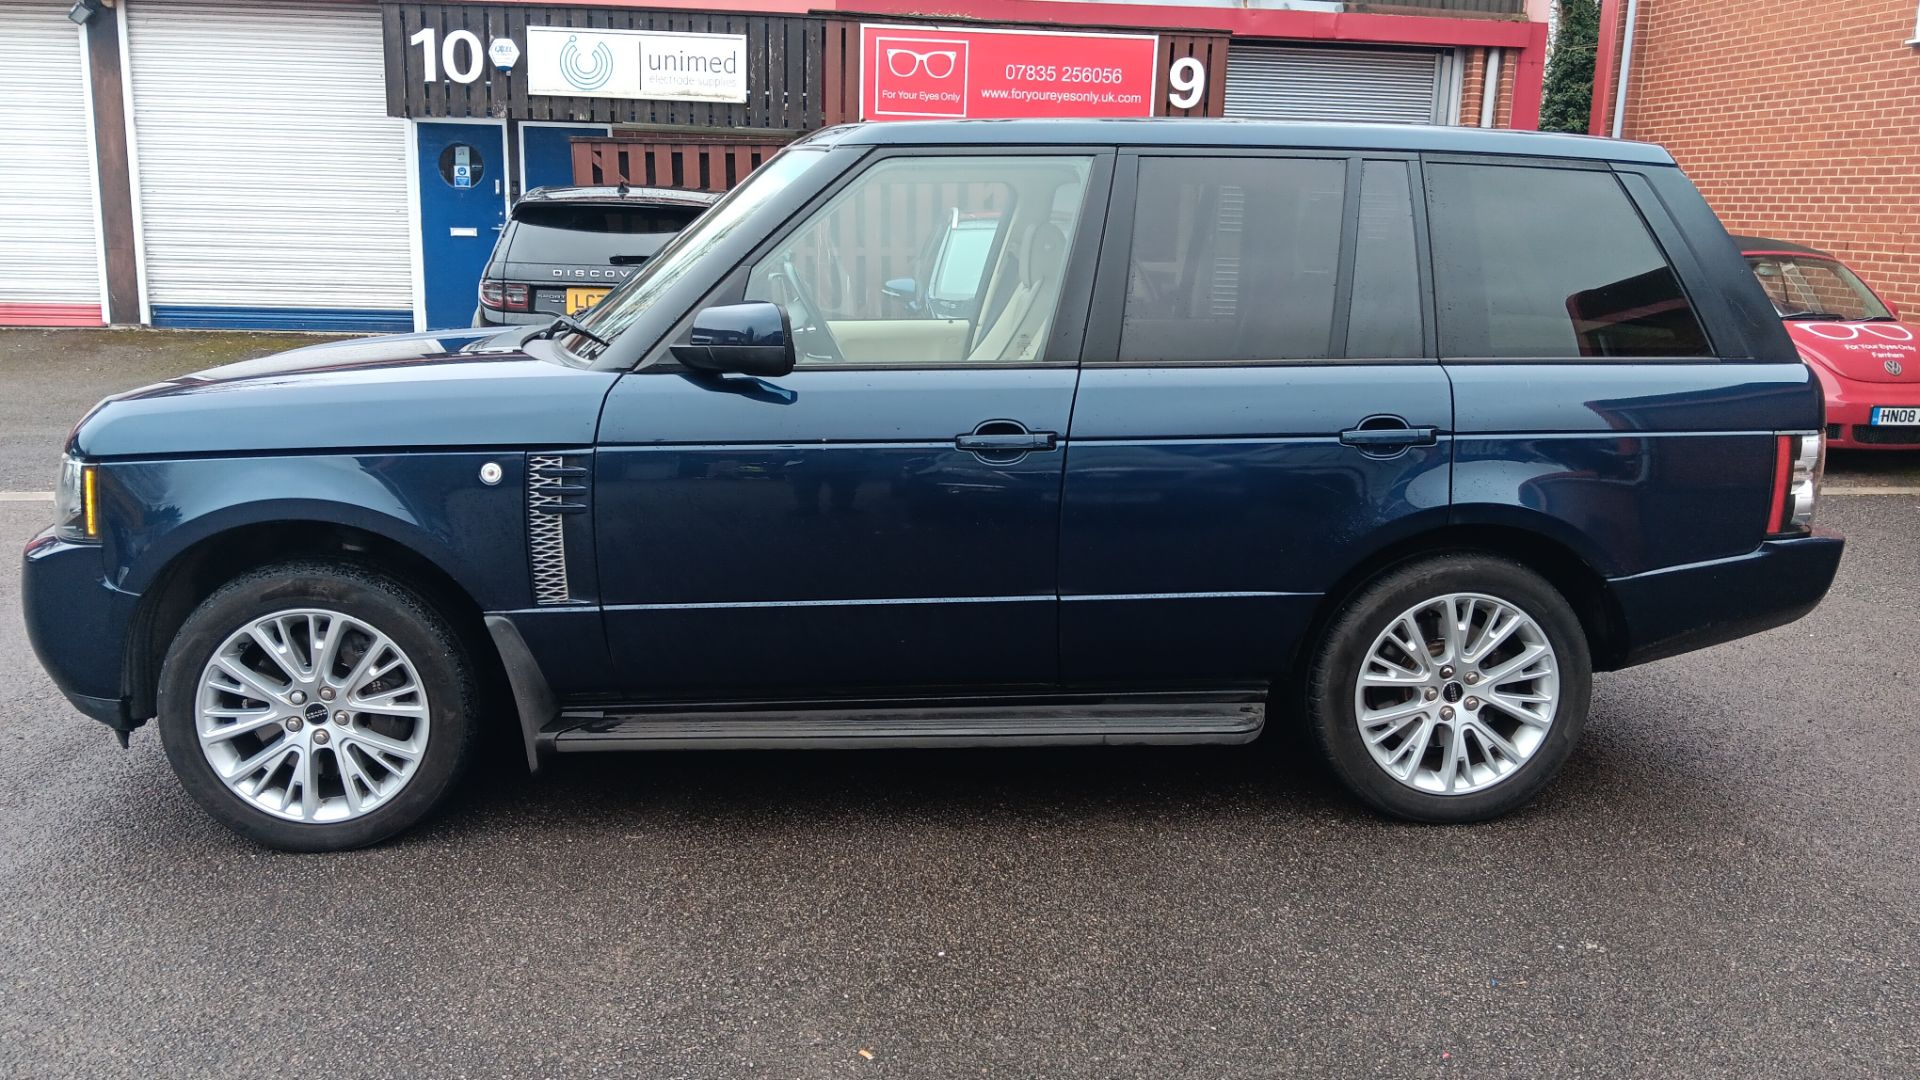 Land Rover Range Rover Special Editions 4.4 TDV8 Westminster 4dr 8 speed Auto, Registration L80 PCG - Image 4 of 28